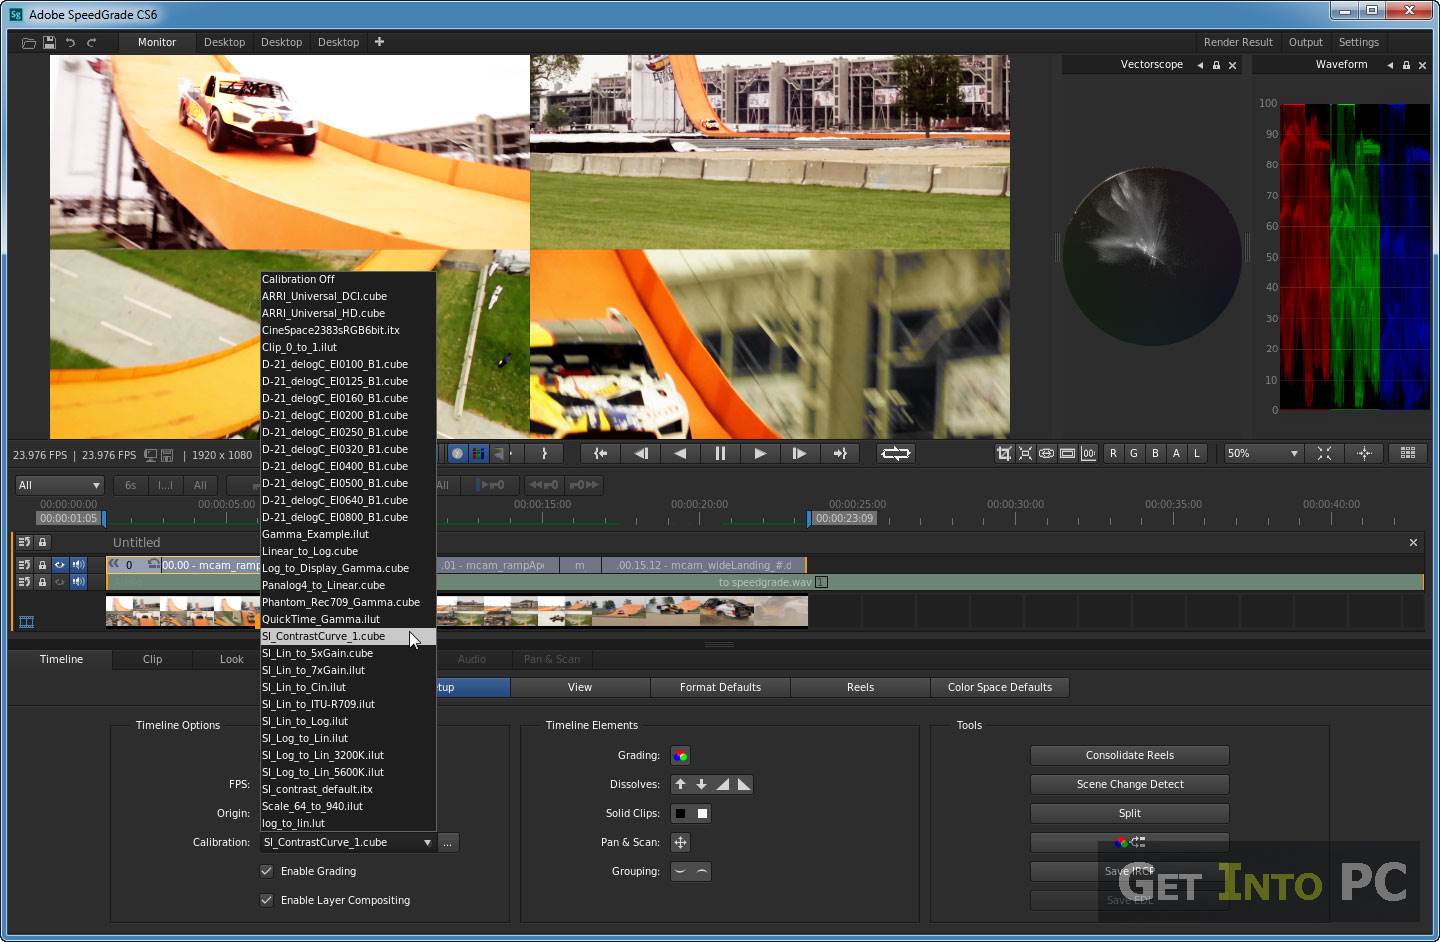 Adobe premiere pro cs6 video editing software free download photoshop winrar free download